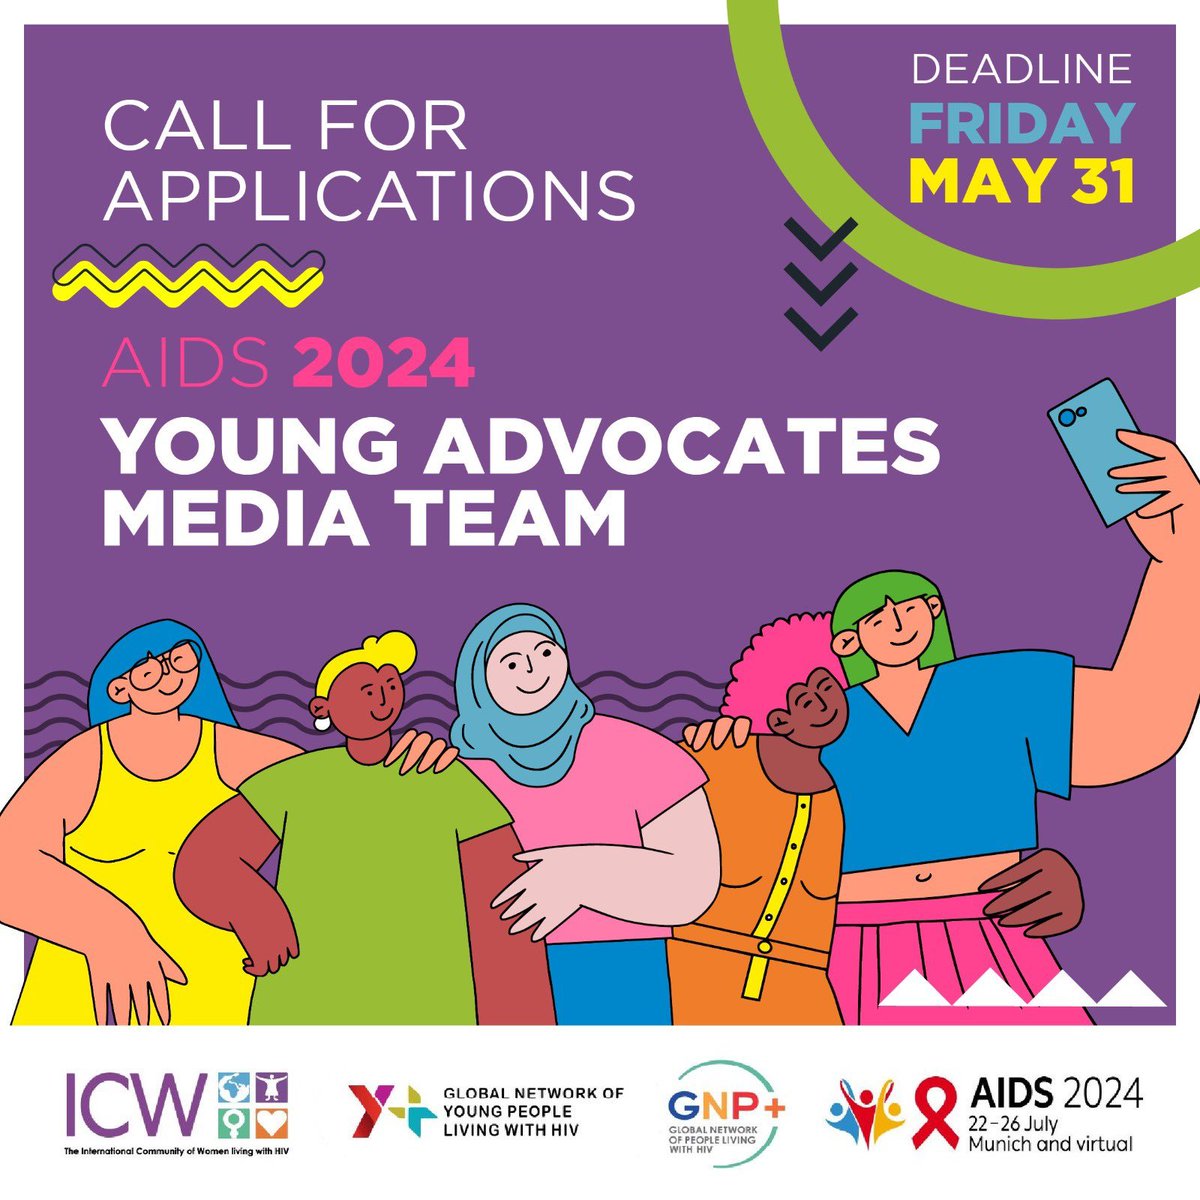 Call for applications is now open for young advocates to join the Social Media Advocacy Program for the @AIDS_conference. Y+ Global, @ICW_Global & @gnpplus have partnered on this initiative aimed at increasing youth engagement & visibility at the conference. Fill the form 👉🏼